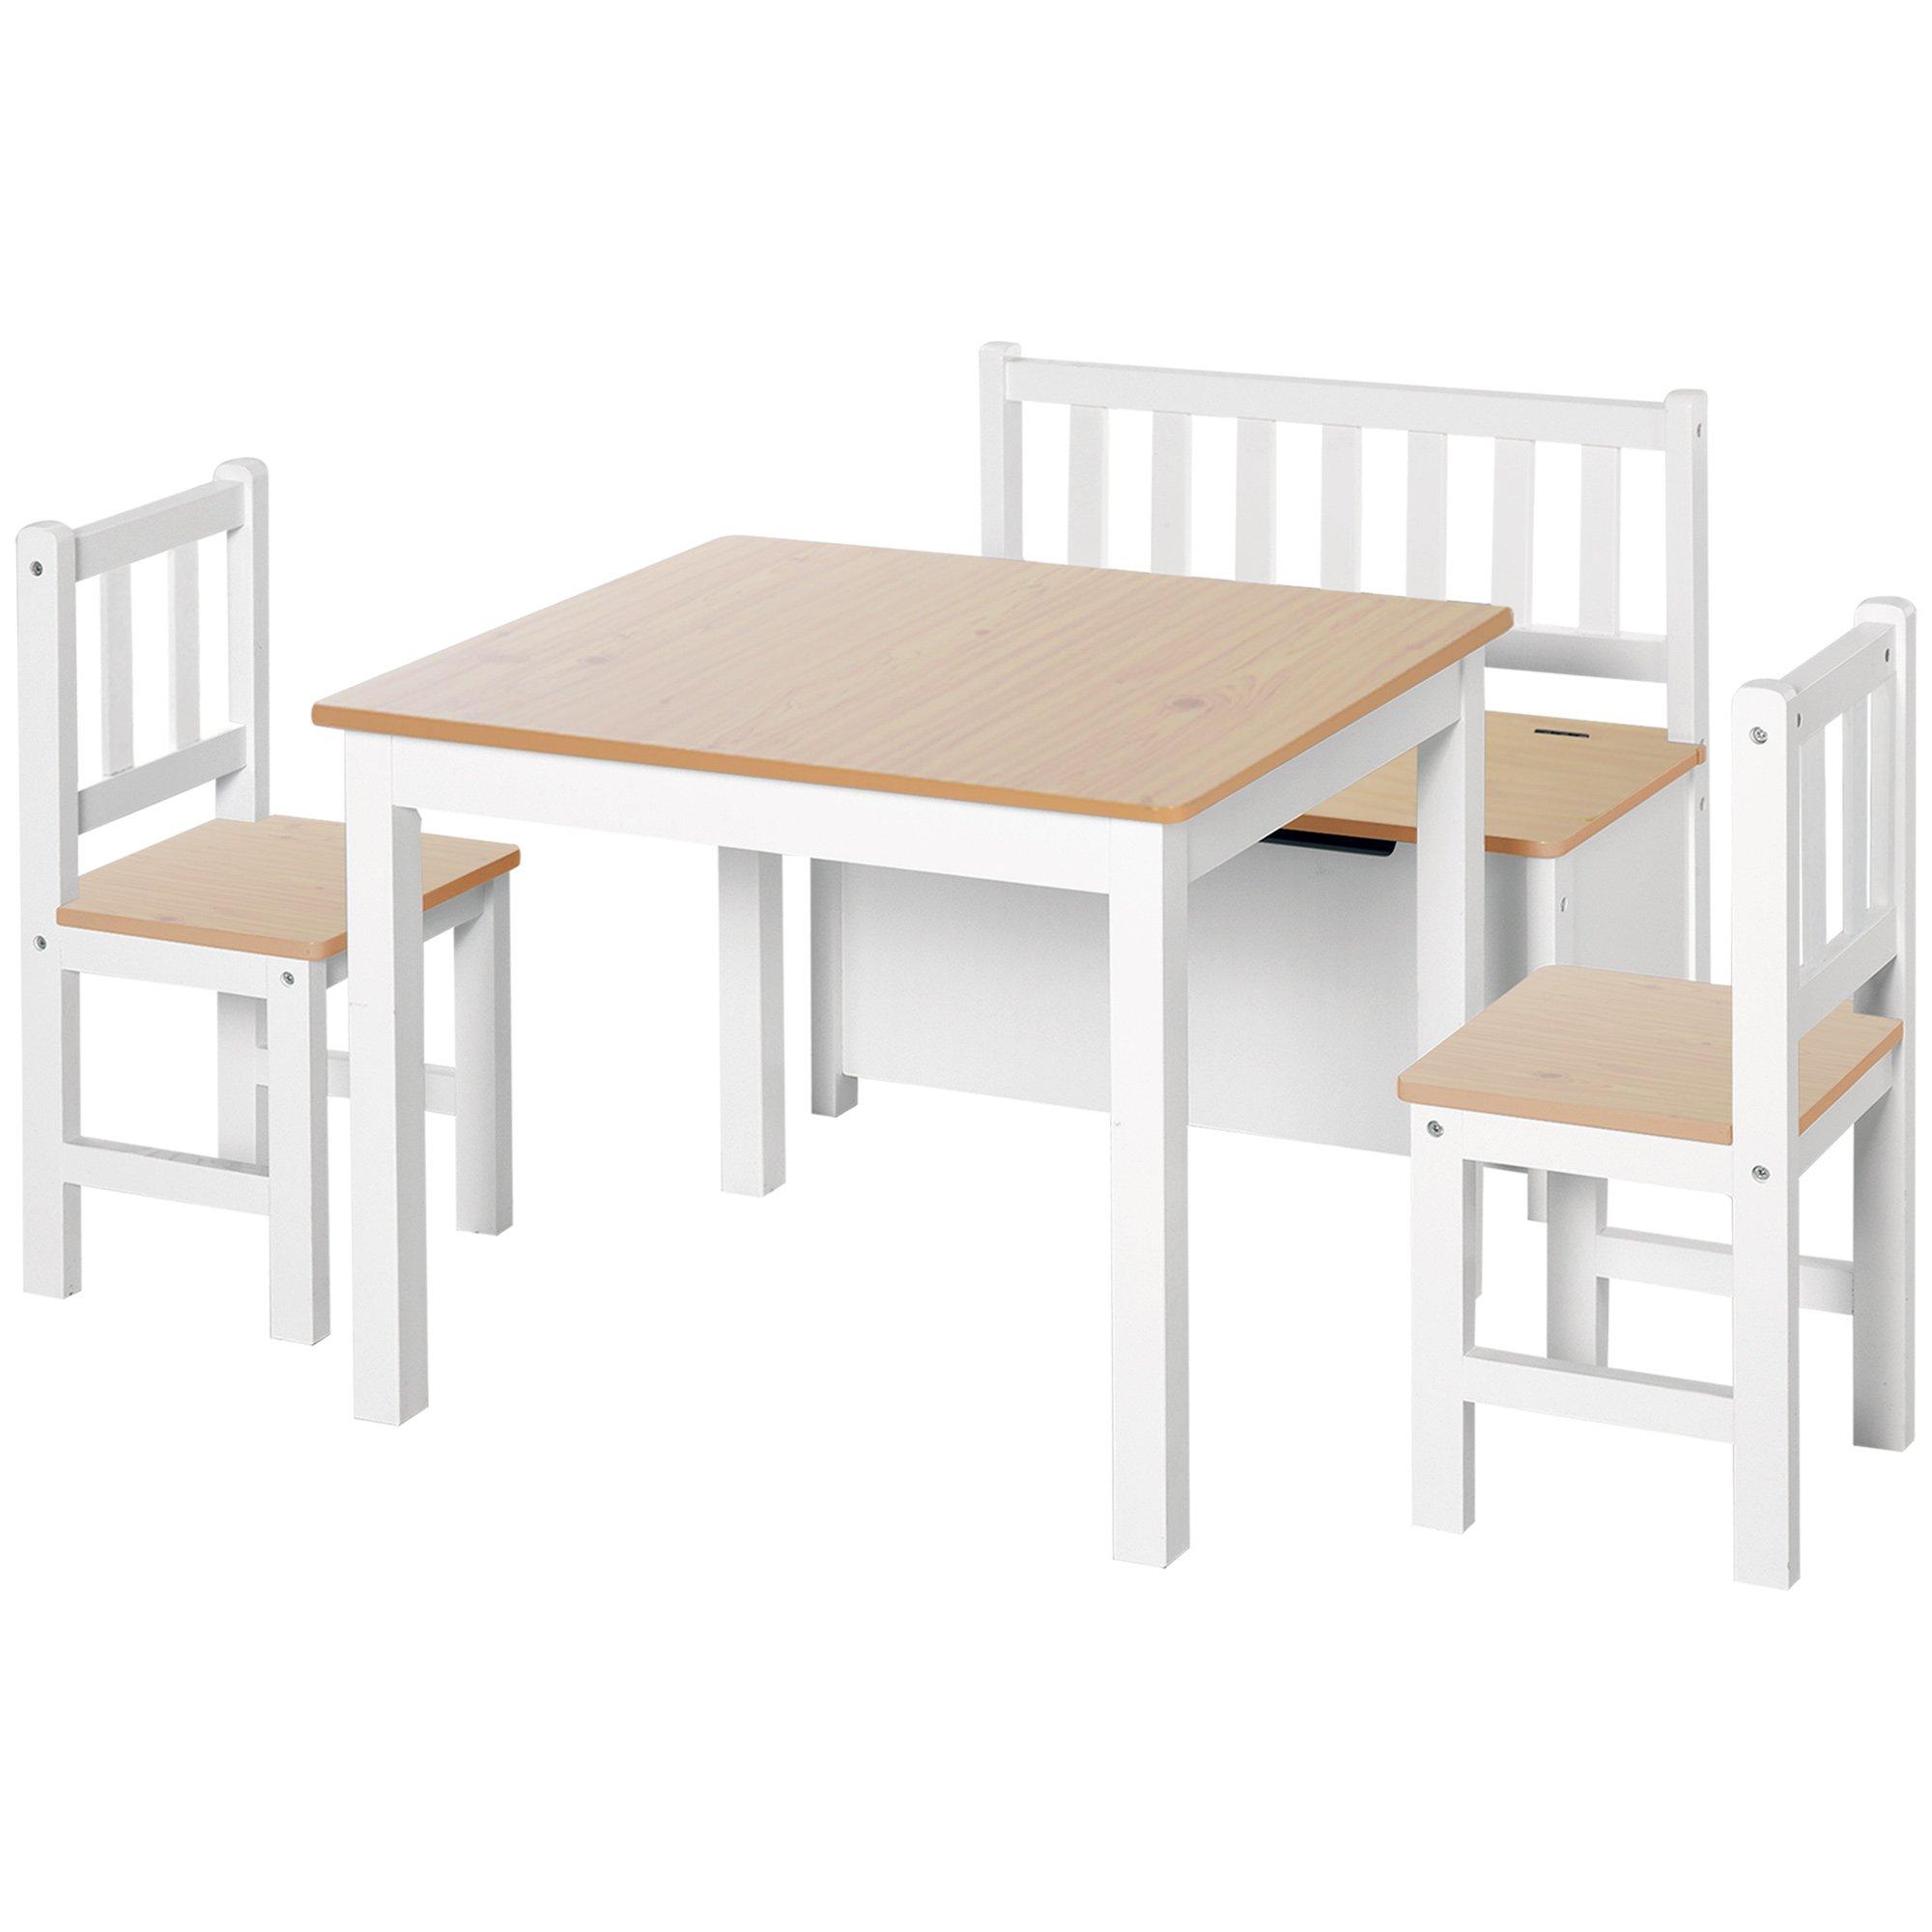 4-Piece Table and Chair Wood Bench with Storage Feature, Gift for Toddlers